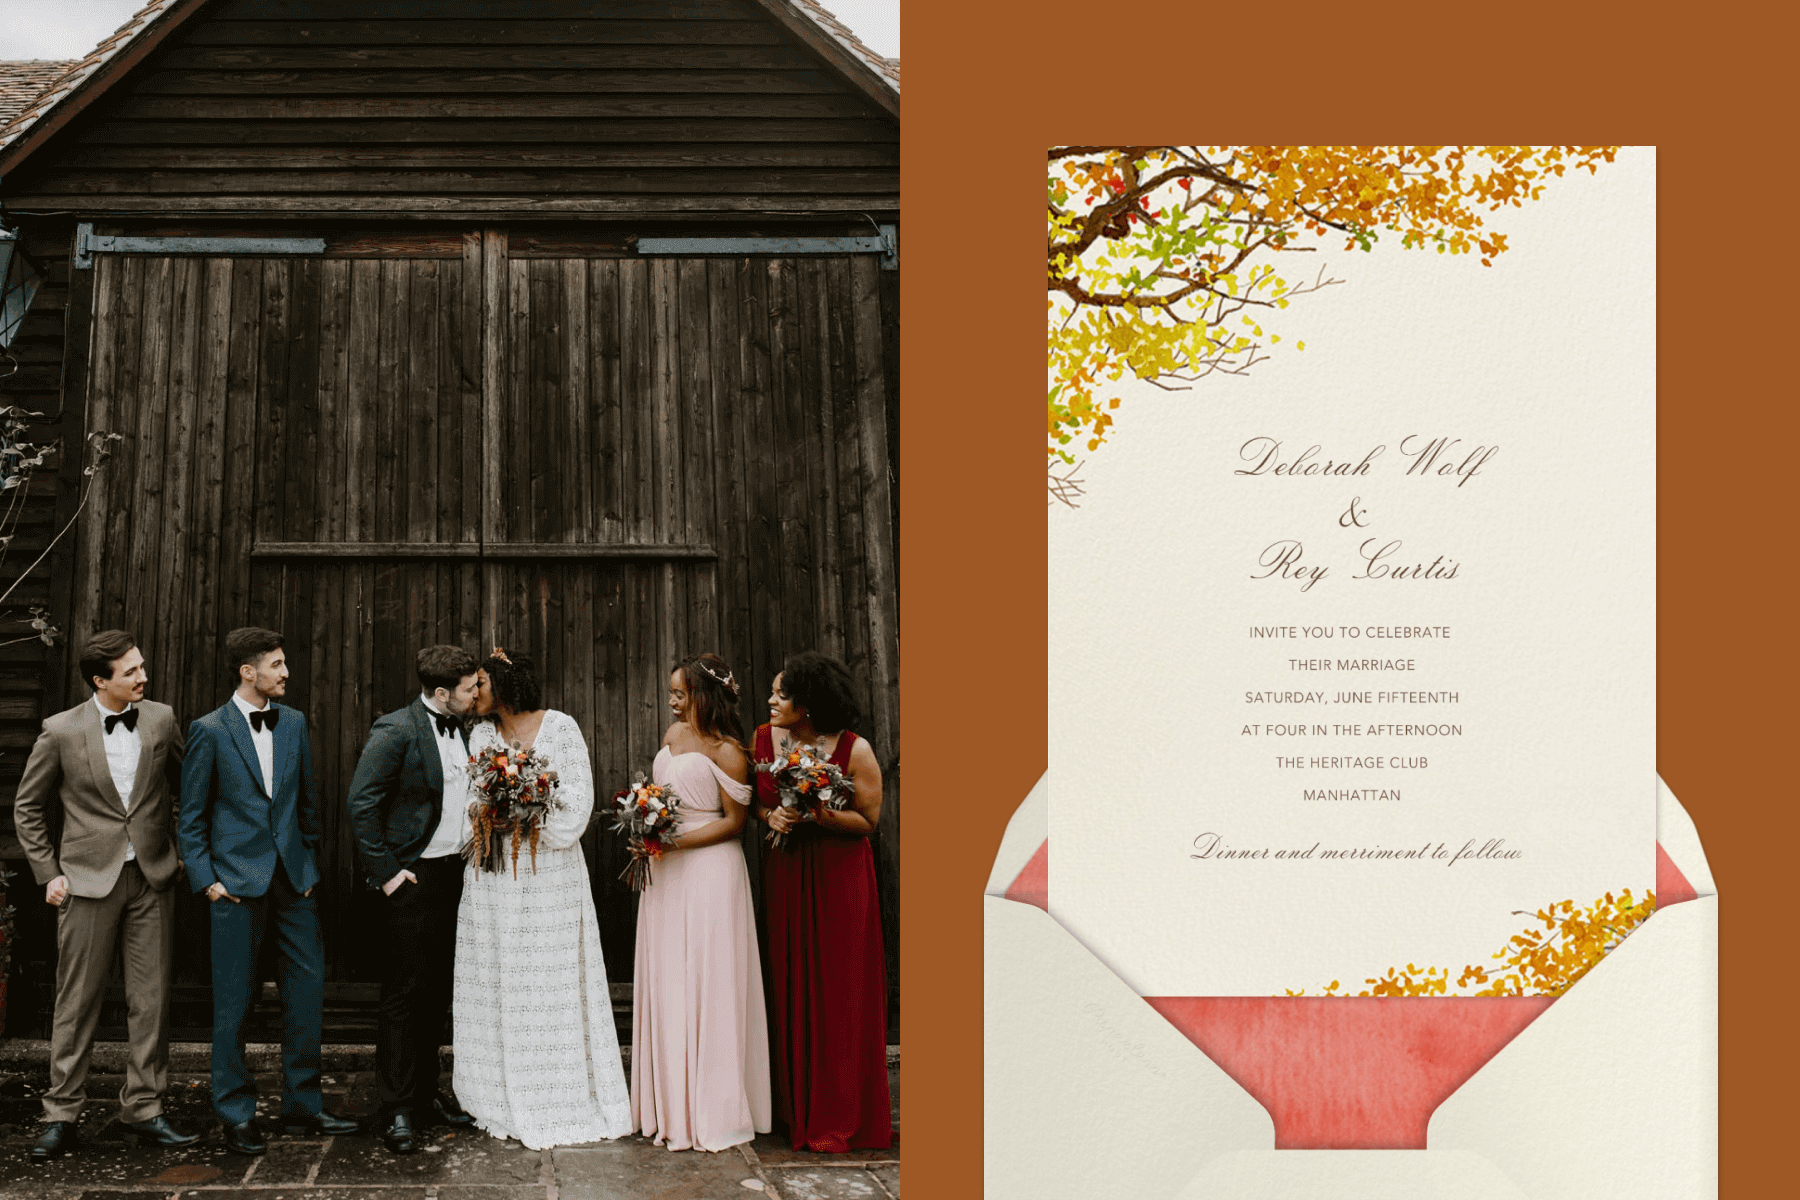 left: A man and woman kiss in front of a barn while their wedding party members look on. Right: A wedding invitation with autumnal leaves on a tree branch in the upper left corner.